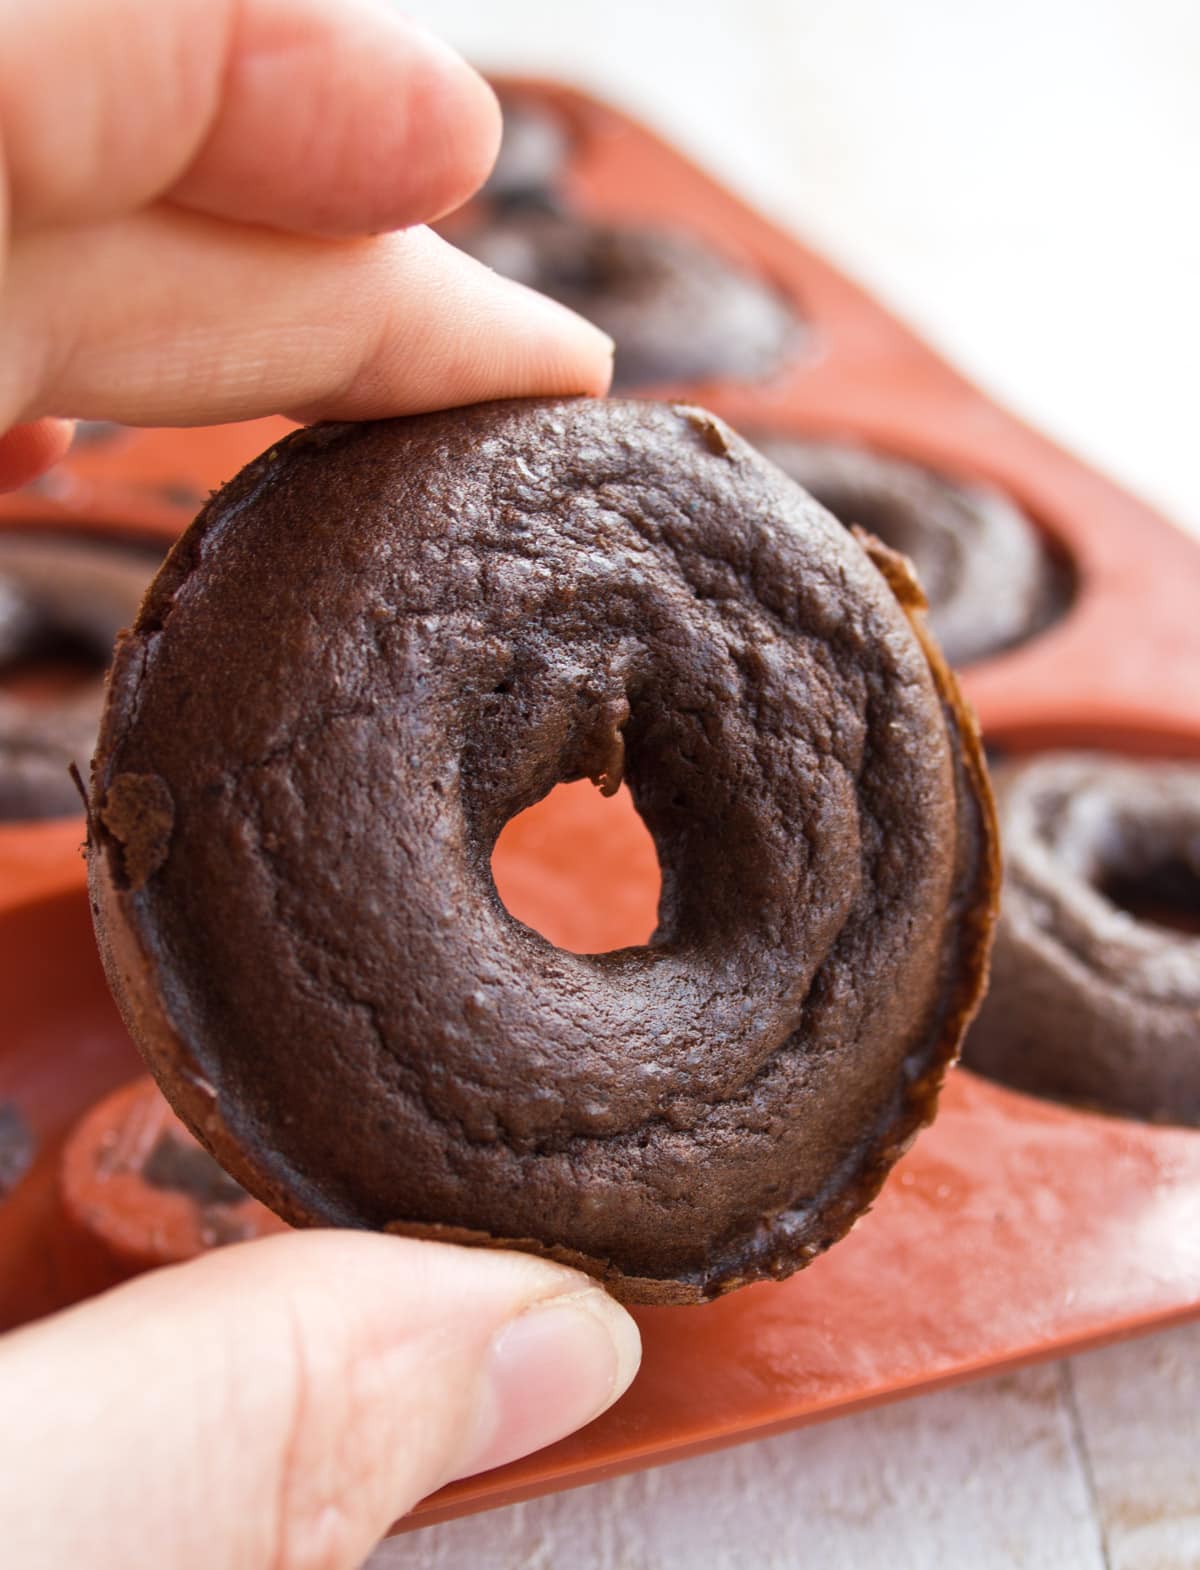 Hand holding a baked chocolate donut.